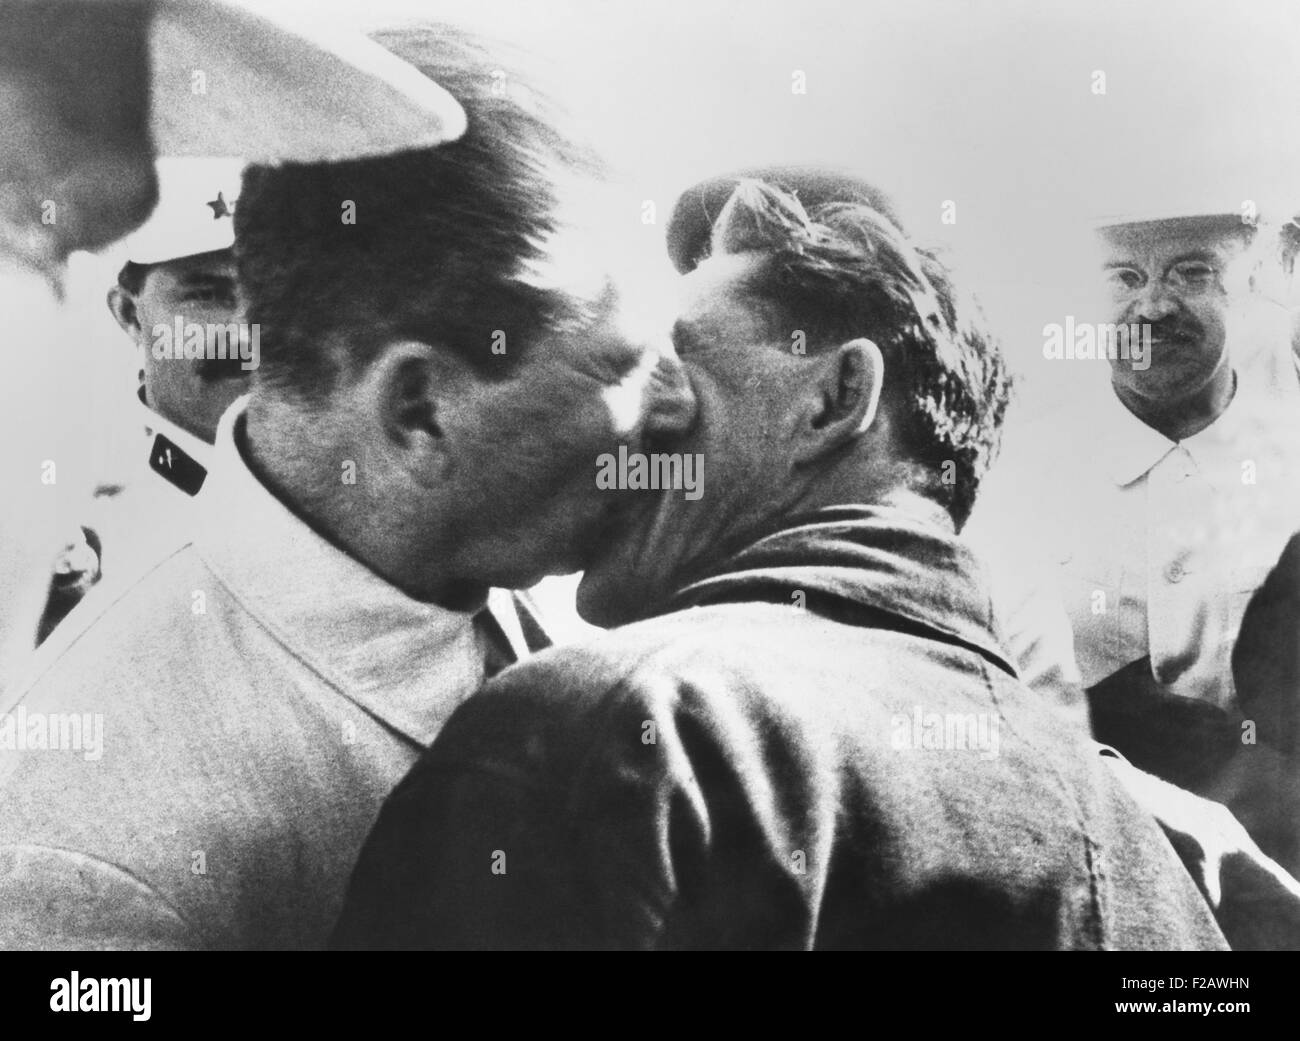 Josef Stalin (left), embracing and kissing Ivan T. Spirin, Chief Navigator of 1937 Polar expedition. Soviet scientists established the world's first North Pole ice station, North Pole-1, 13 miles from the North Pole. (CSU 2015 11 1369) Stock Photo